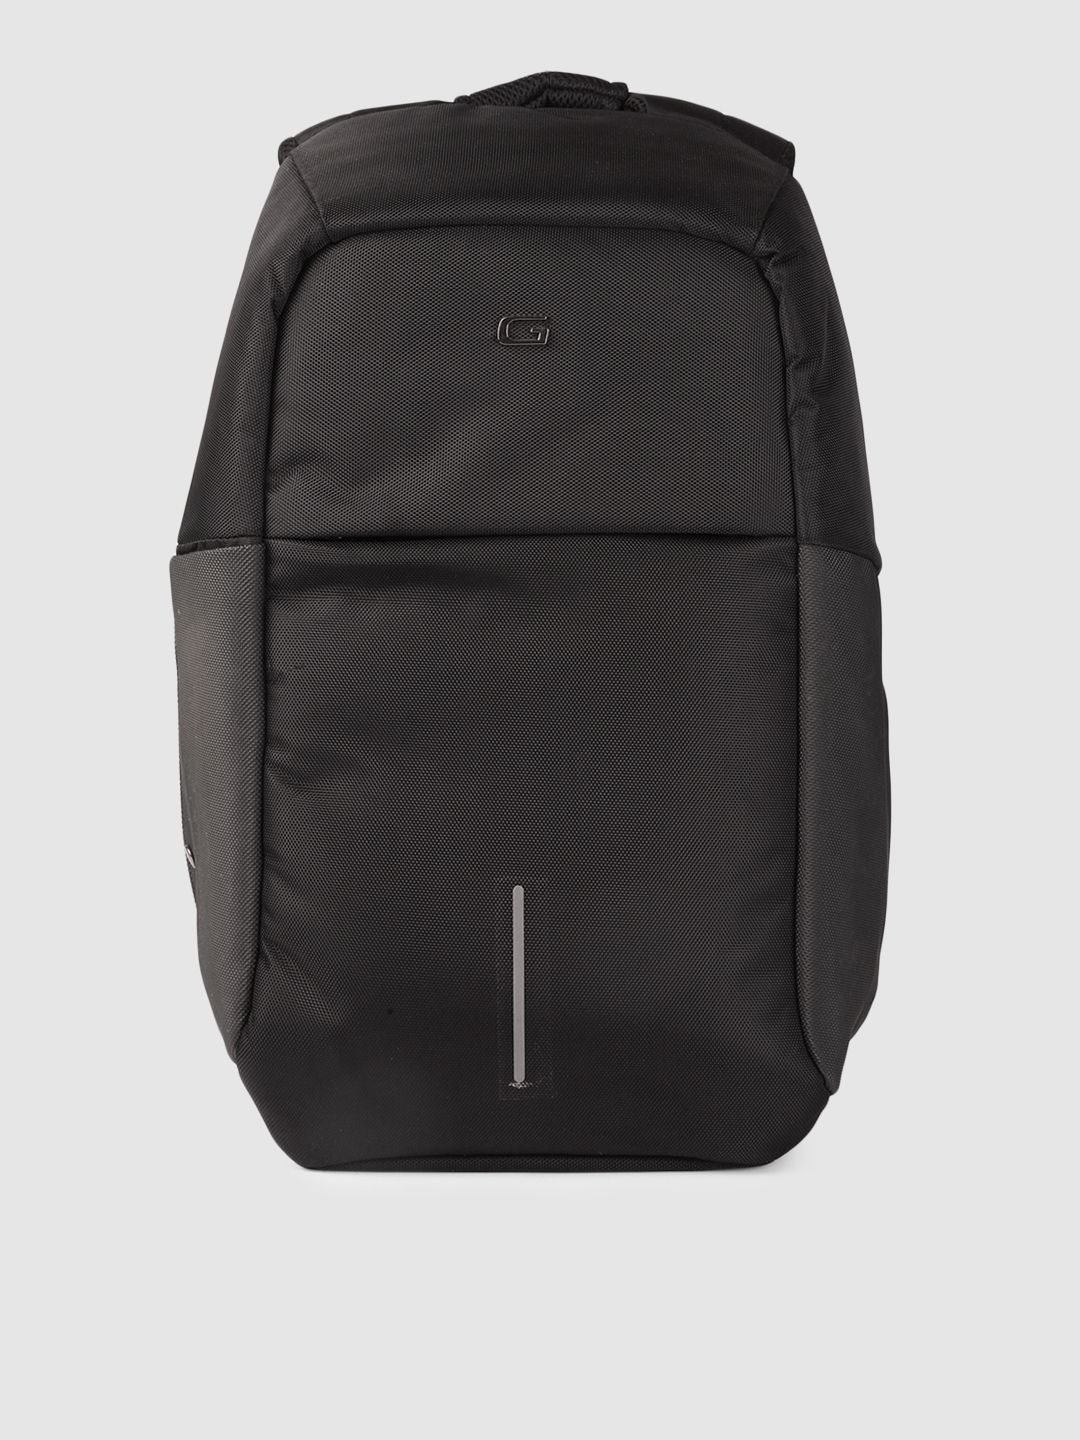 Gear Unisex Black Boxy Anti-theft Laptop Backpack Price in India